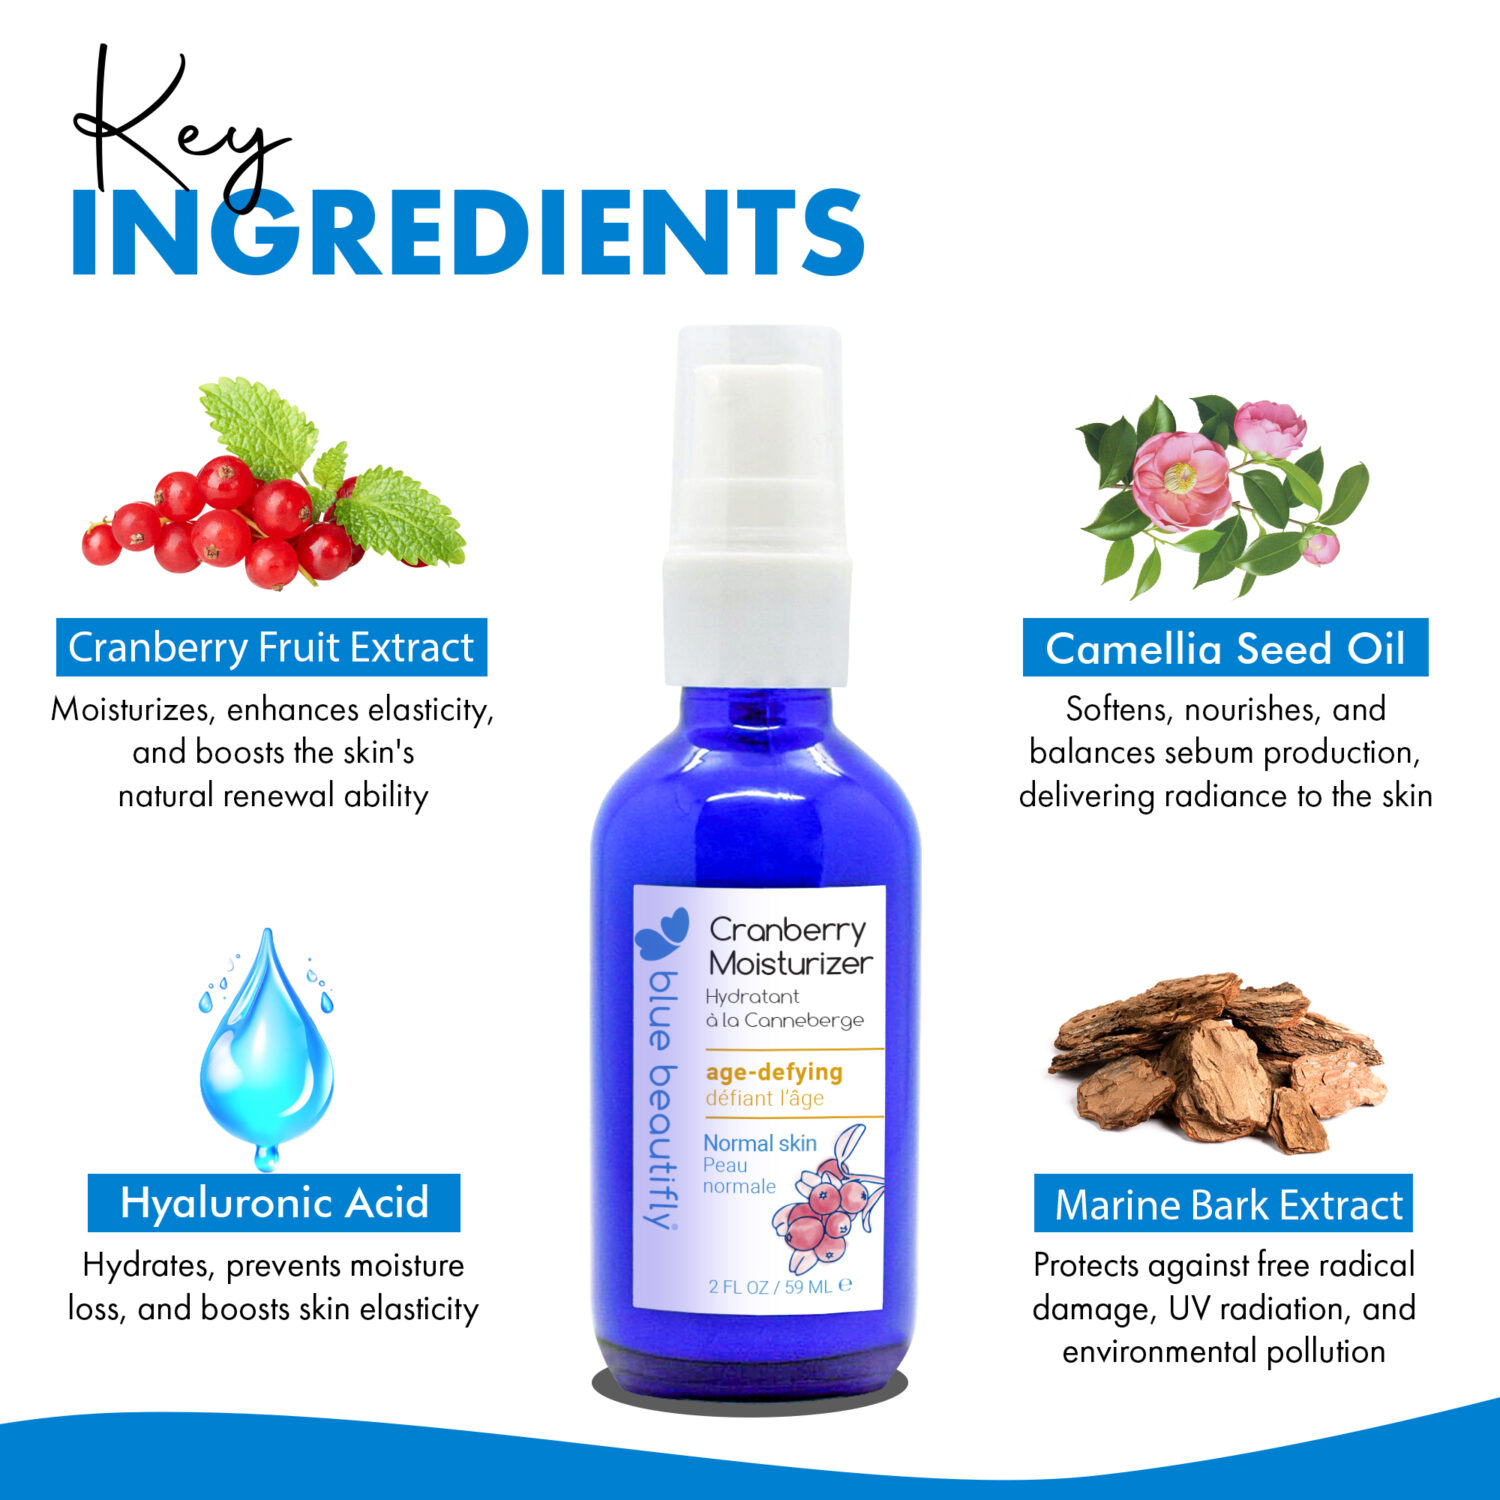 Blue Beautifly Cranberry Moisturizer key ingredients are Cranberries, hyaluronic acid, marine bark extract, and camellia seed oil